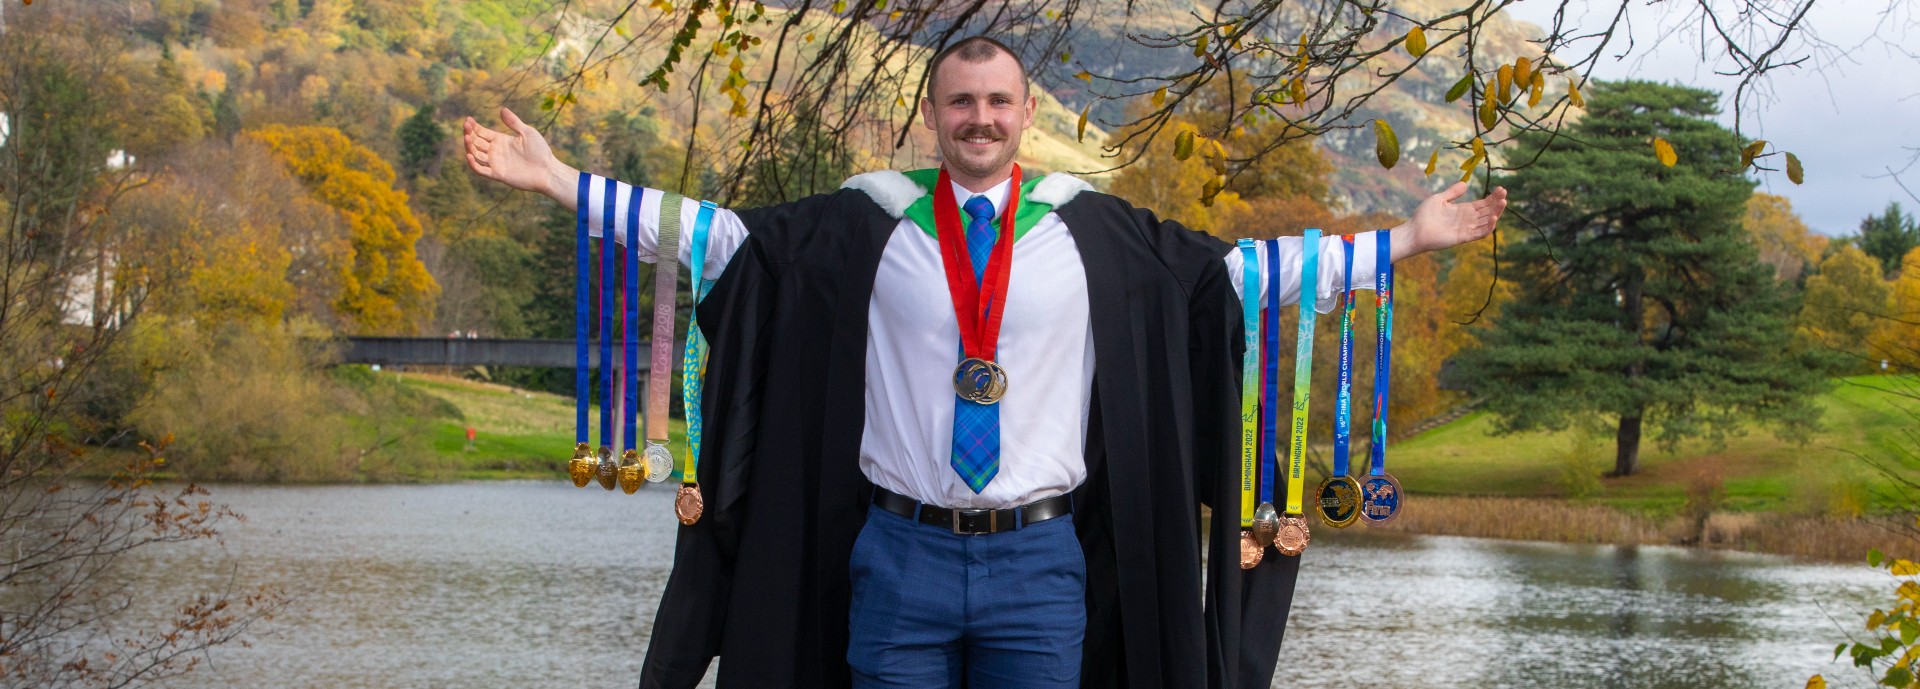 Ross poses next to loch in graduation gown holding medals